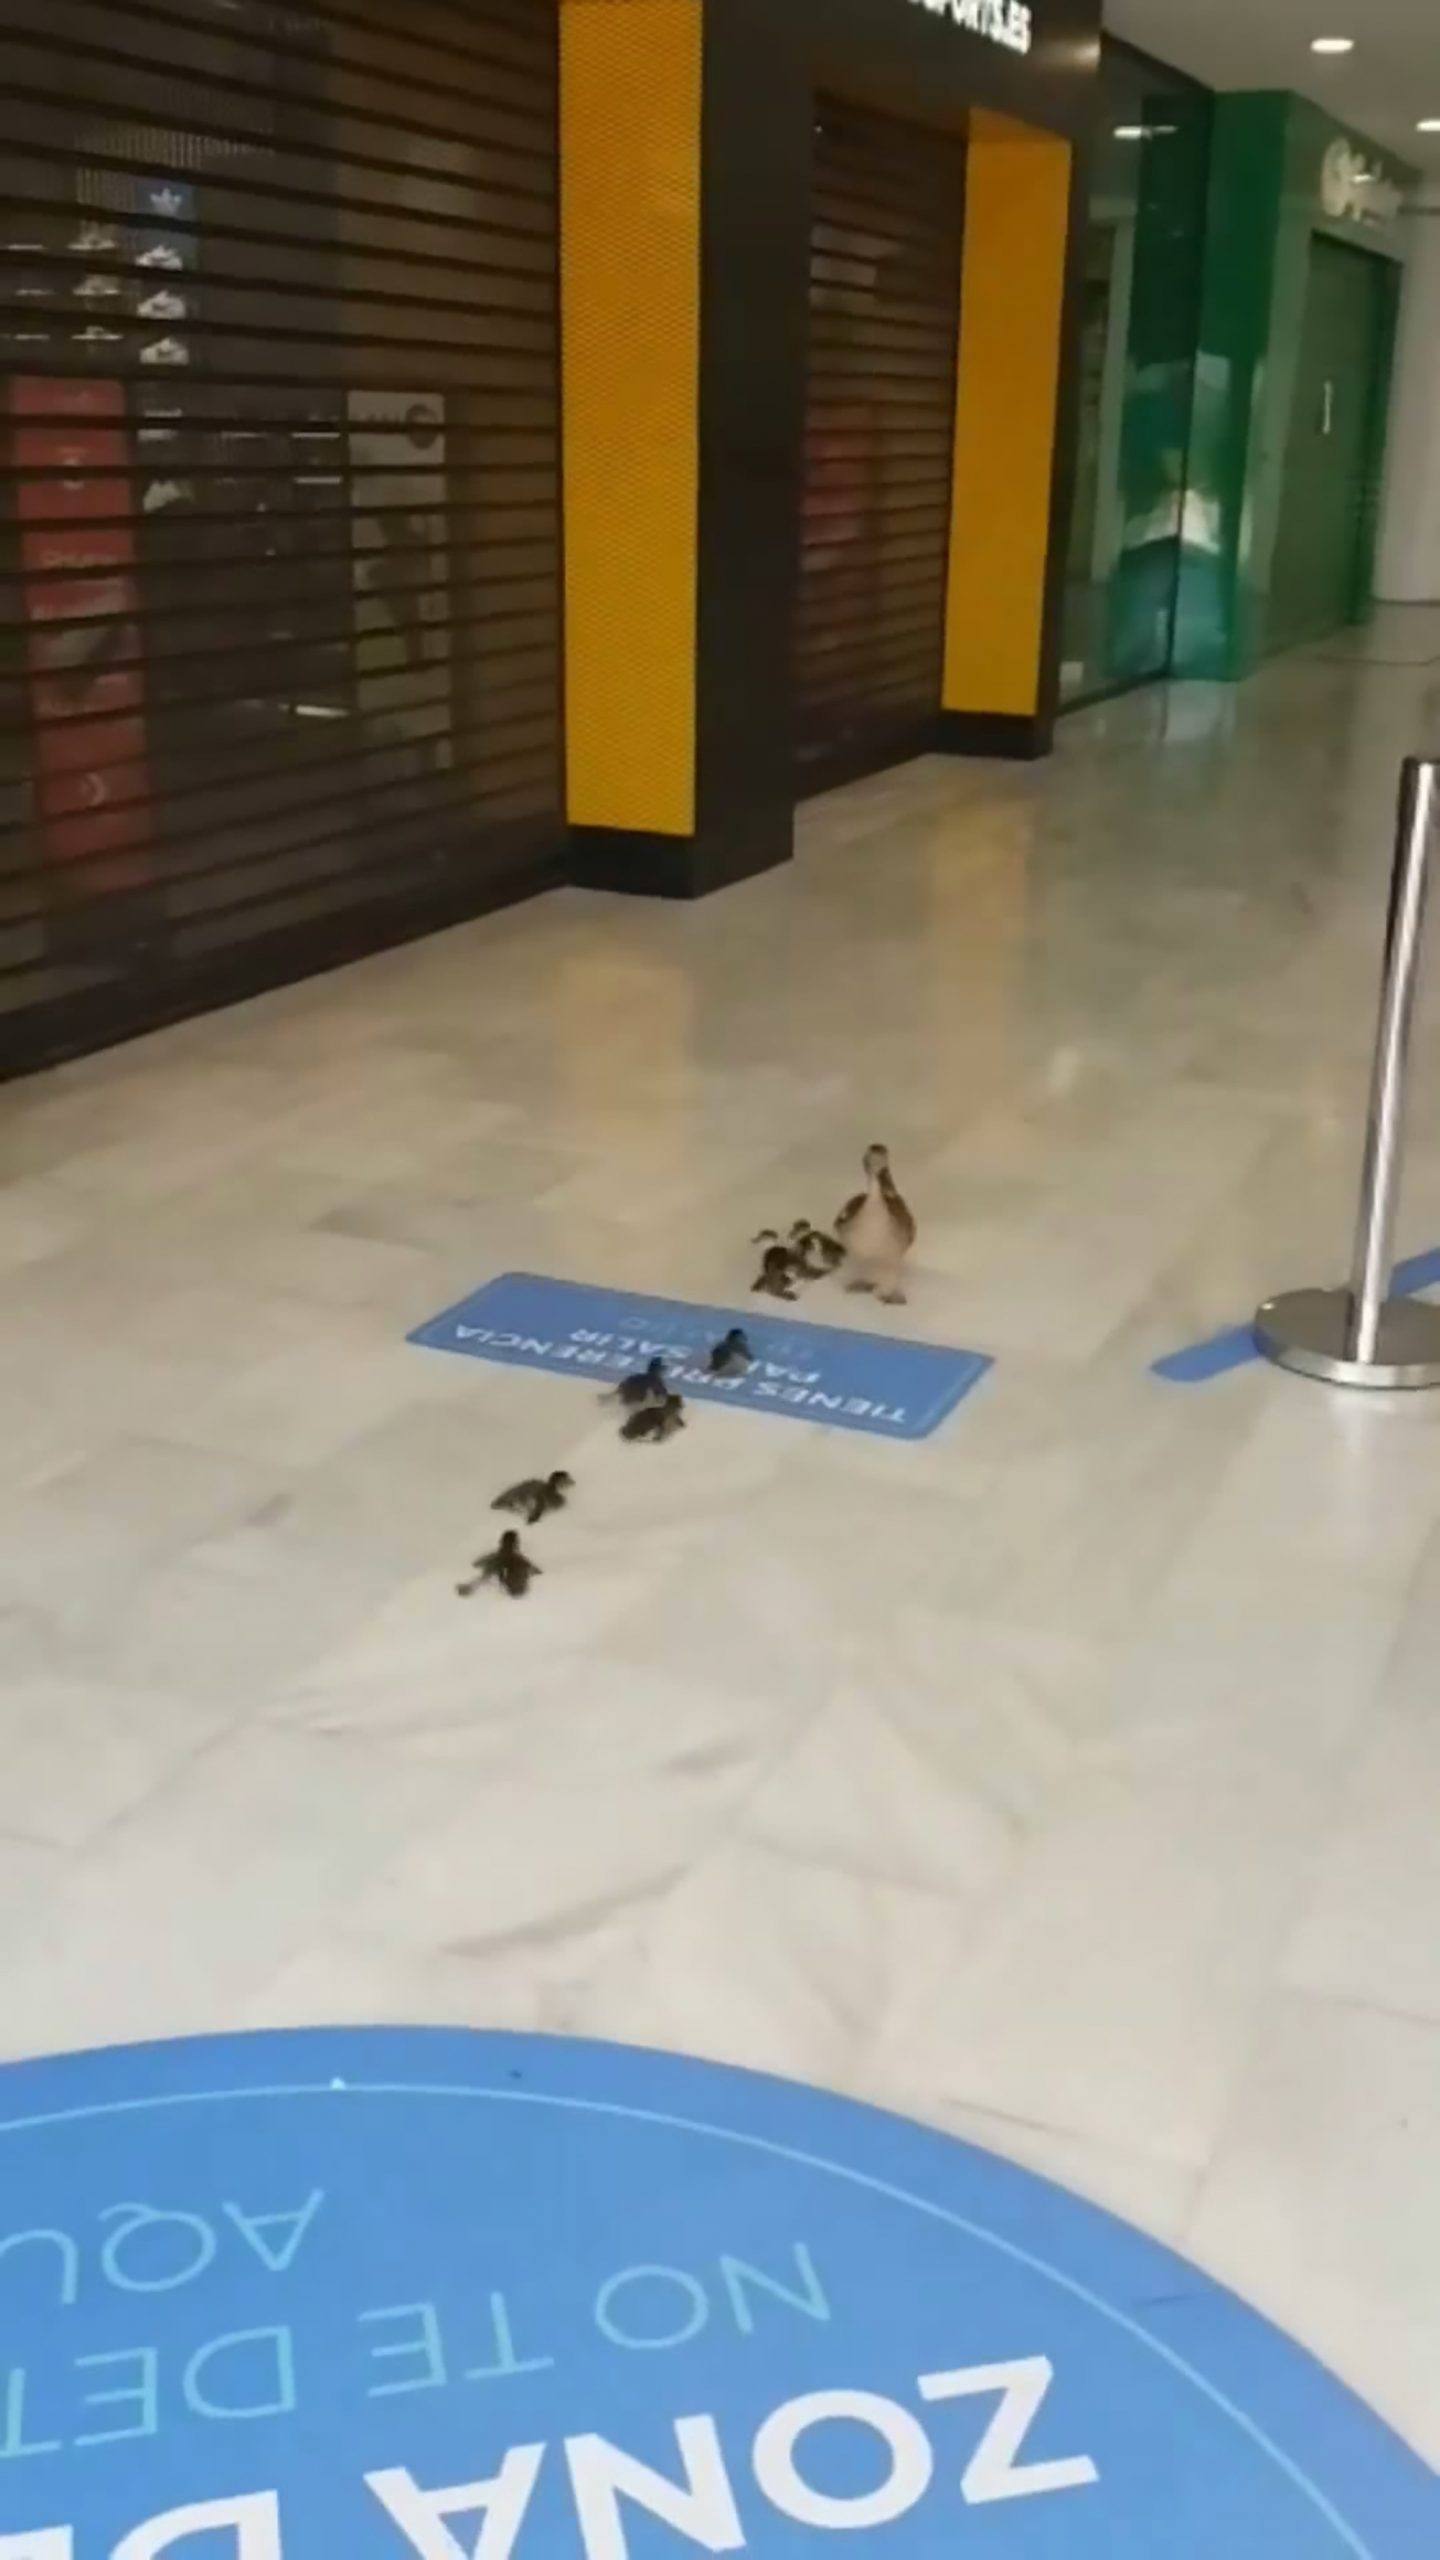 Read more about the article Duckling Struggles To Keep Up With Mum On Shiny Floor